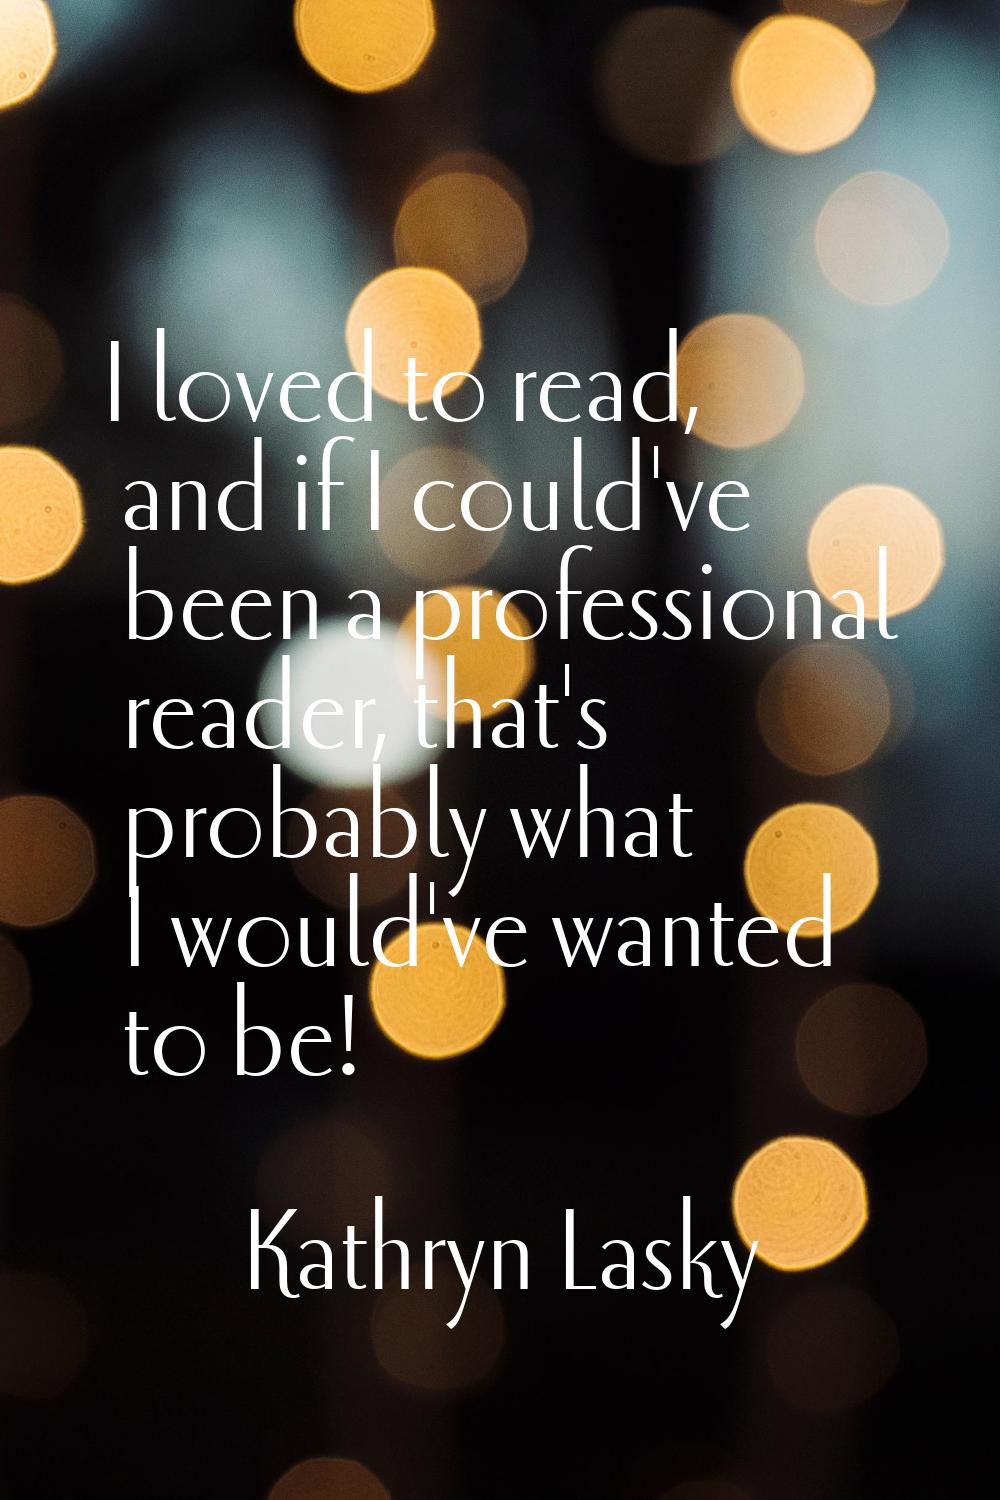 I loved to read, and if I could've been a professional reader, that's probably what I would've want